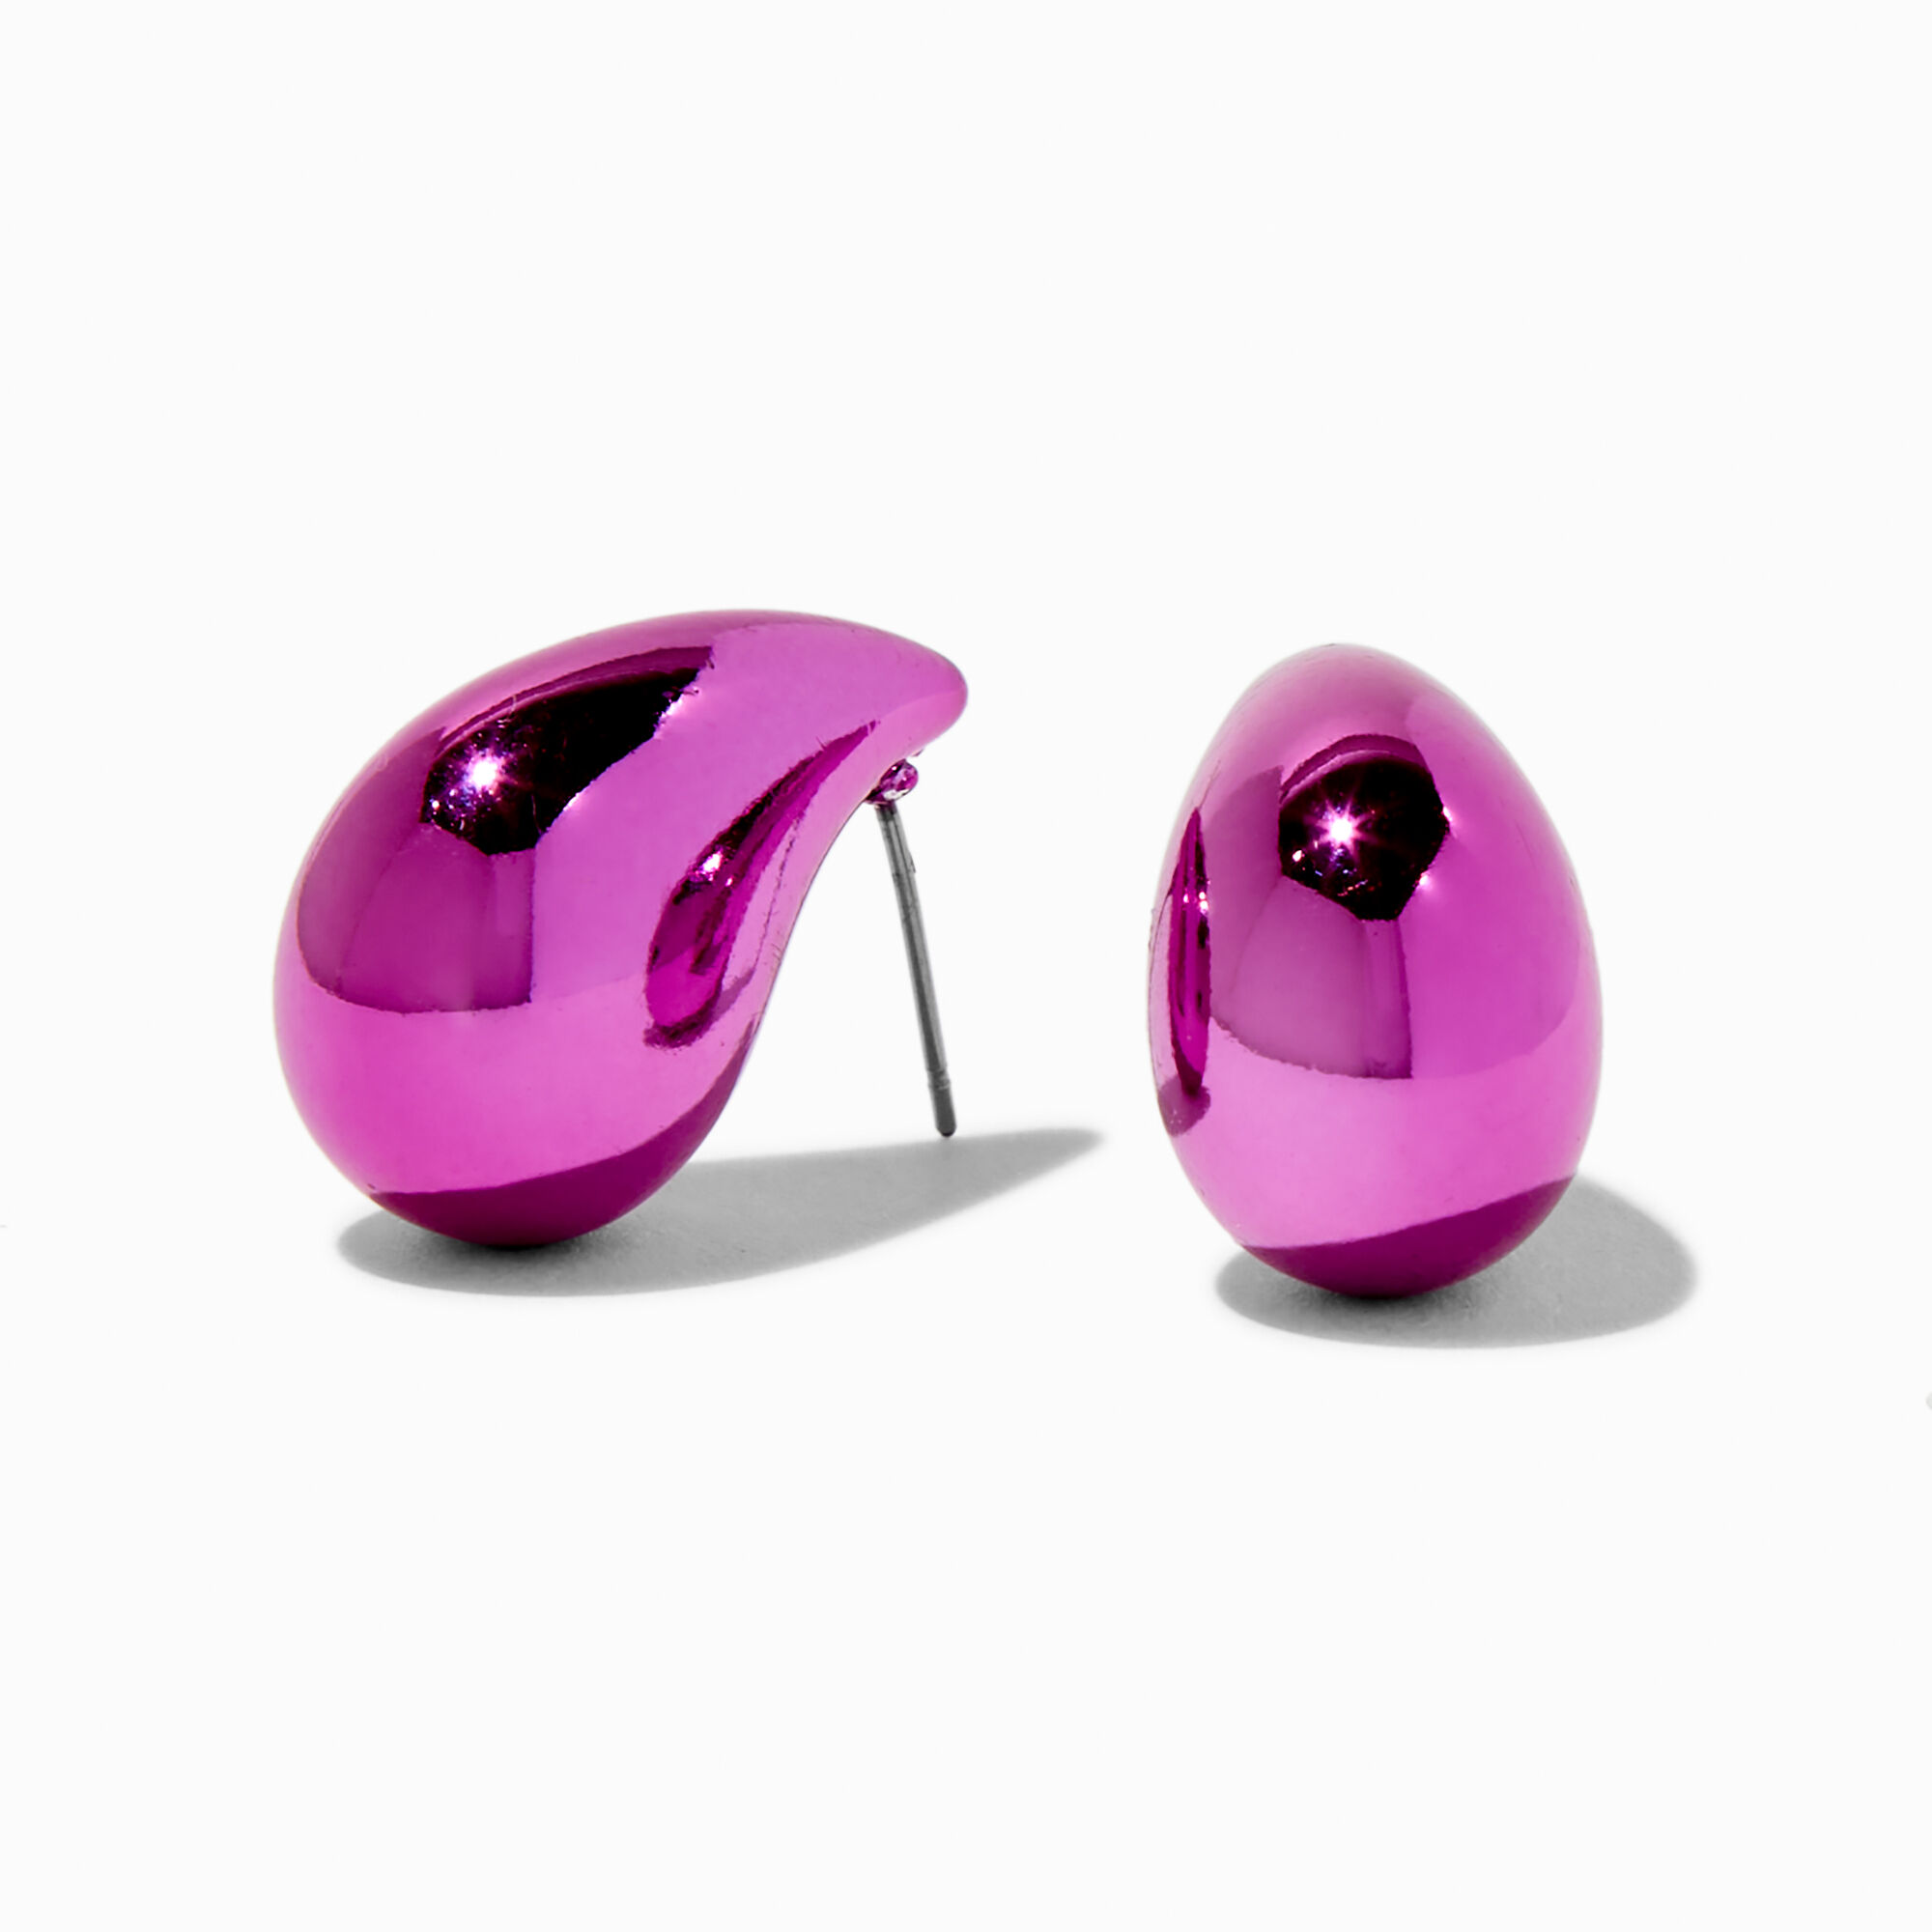 View Mean Girls X Claires Bubble Teardrop Stud Earrings Pink information